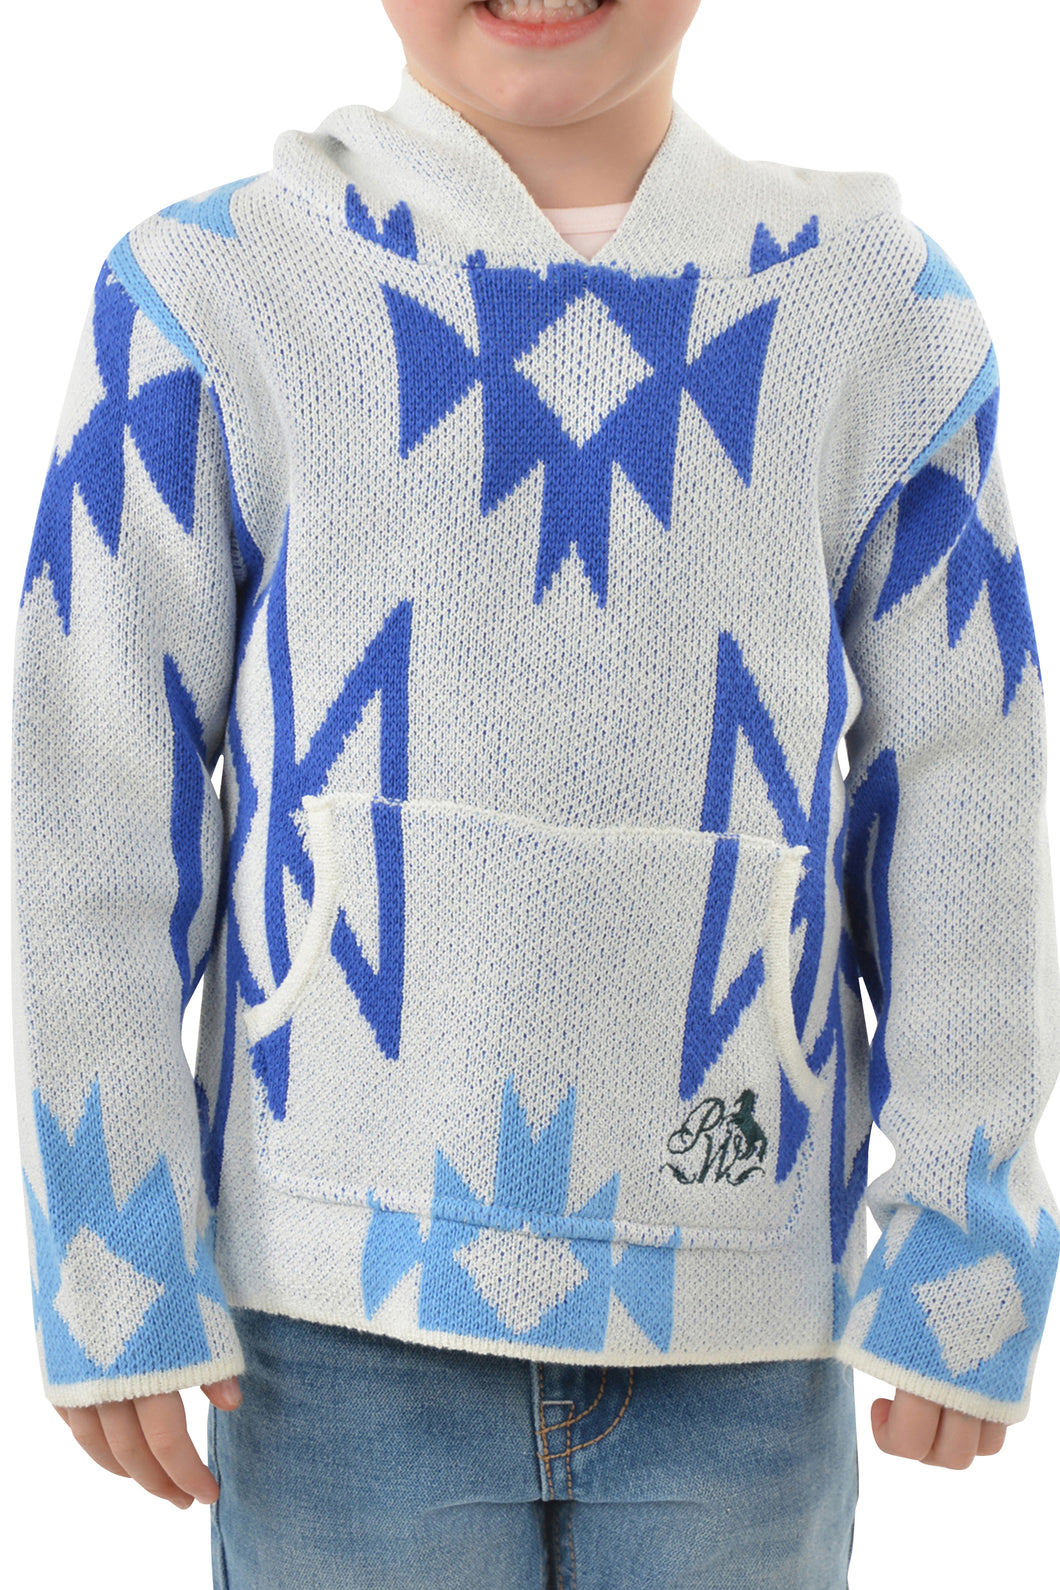 PURE WESTERN GIRLS KHLOE KNITTED PULLOVER